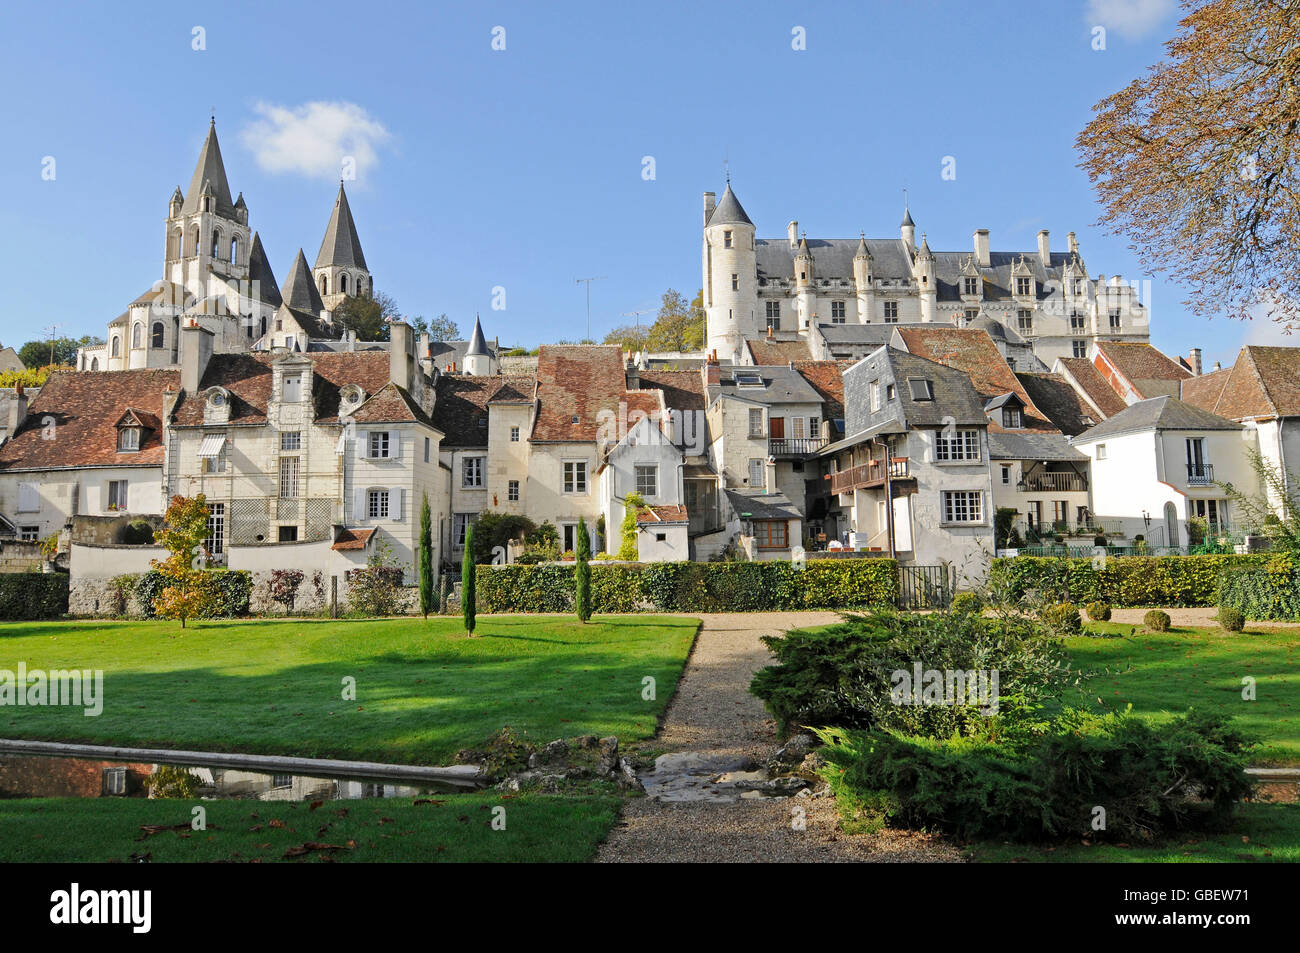 Chateau de Loches, Church of Saint-Ours, Logis Royal, Loches, Indre-et-Loire, Centre, France / Chateaux of the Loire Valley Stock Photo